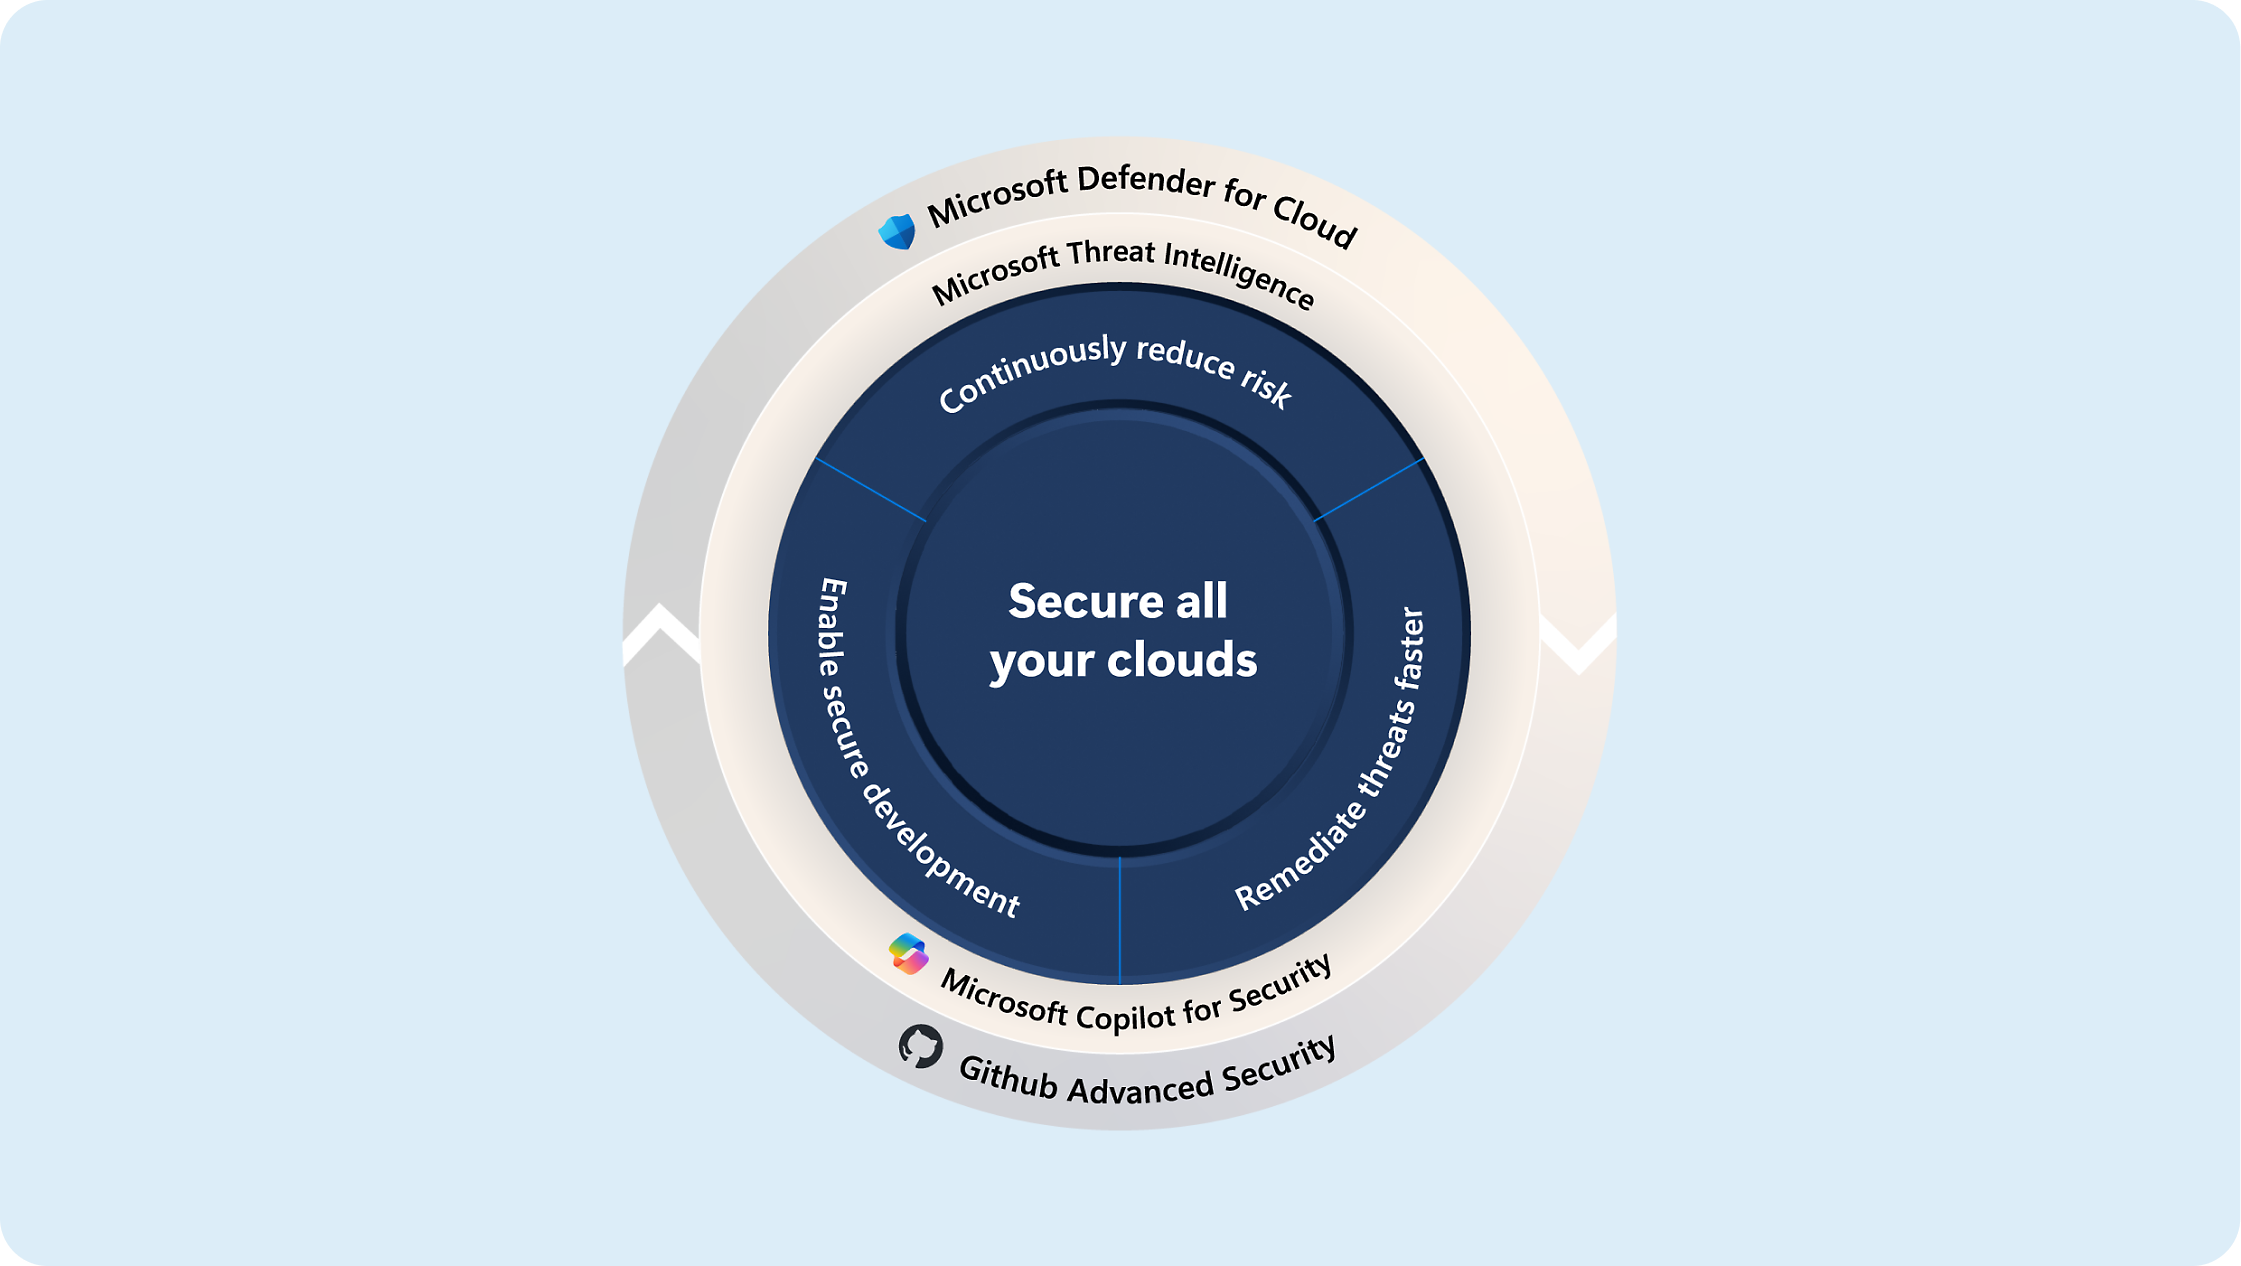 Diagram showing strategies to secure clouds with microsoft defender, threat intelligence, copilot for security